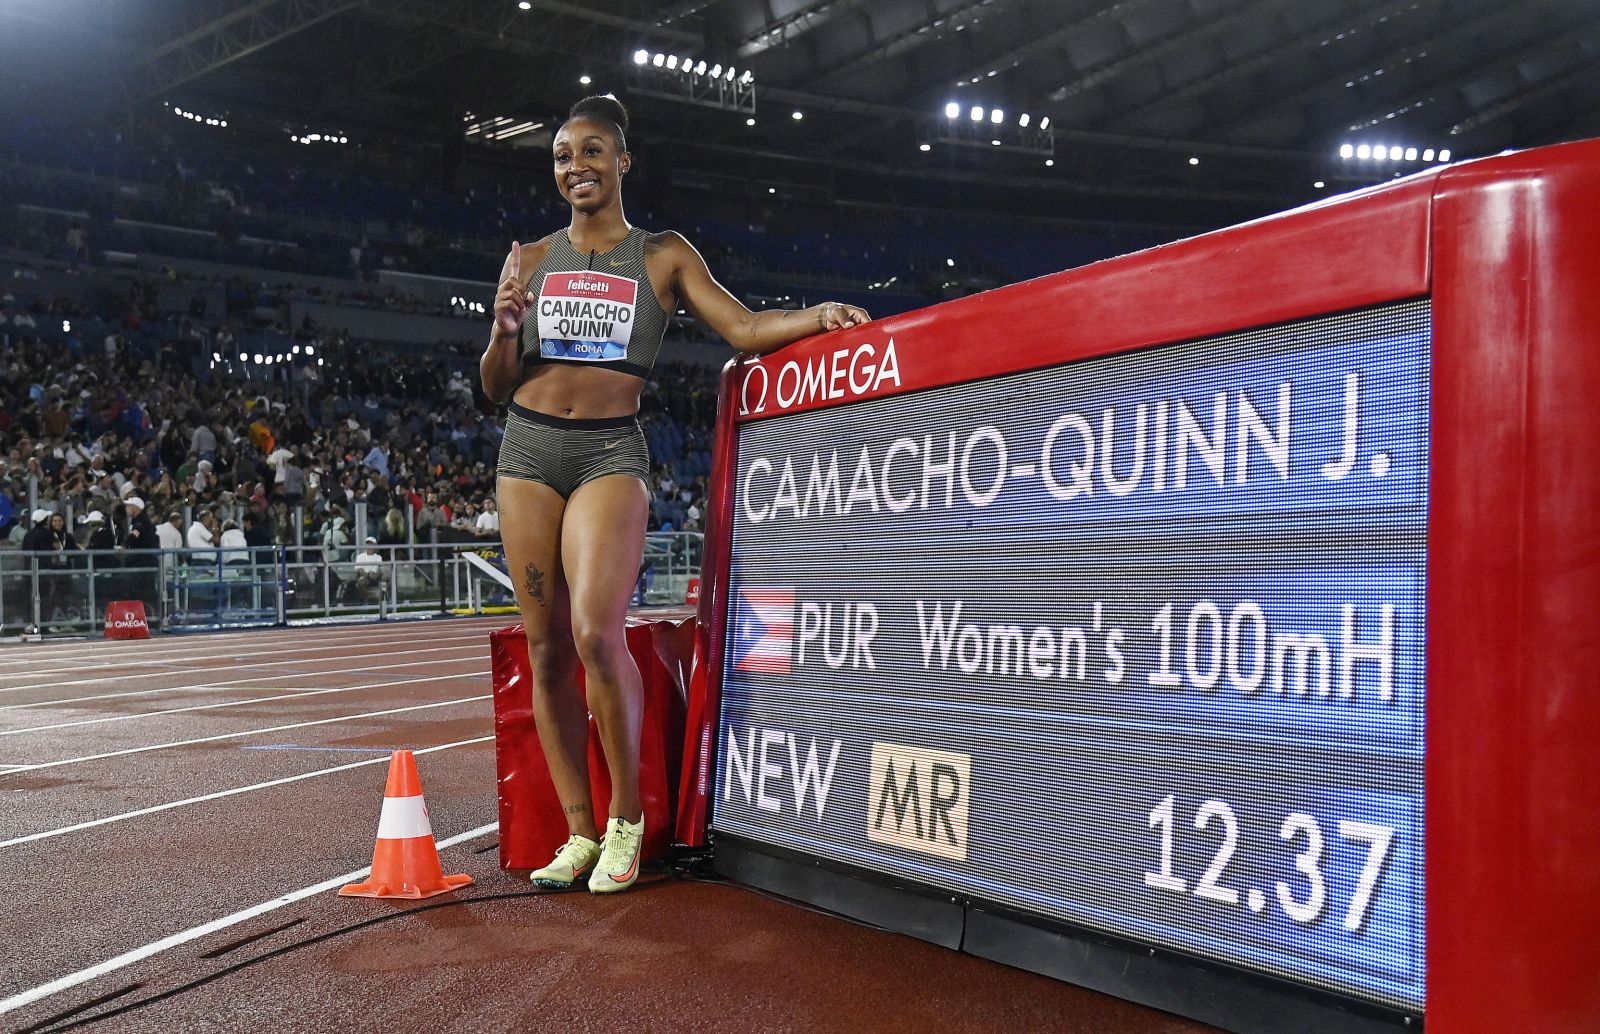 epa10004849 Jasmine Camacho-Quinn of Puerto Rico poses after setting a new meeting record time of 12.37 seconds in the women's 100m Hurdles race of the Diamond League Golden Gala athletics meeting at the Olimpico stadium in Rome, Italy, 09 June 2022.  EPA/Riccardo Antimiani